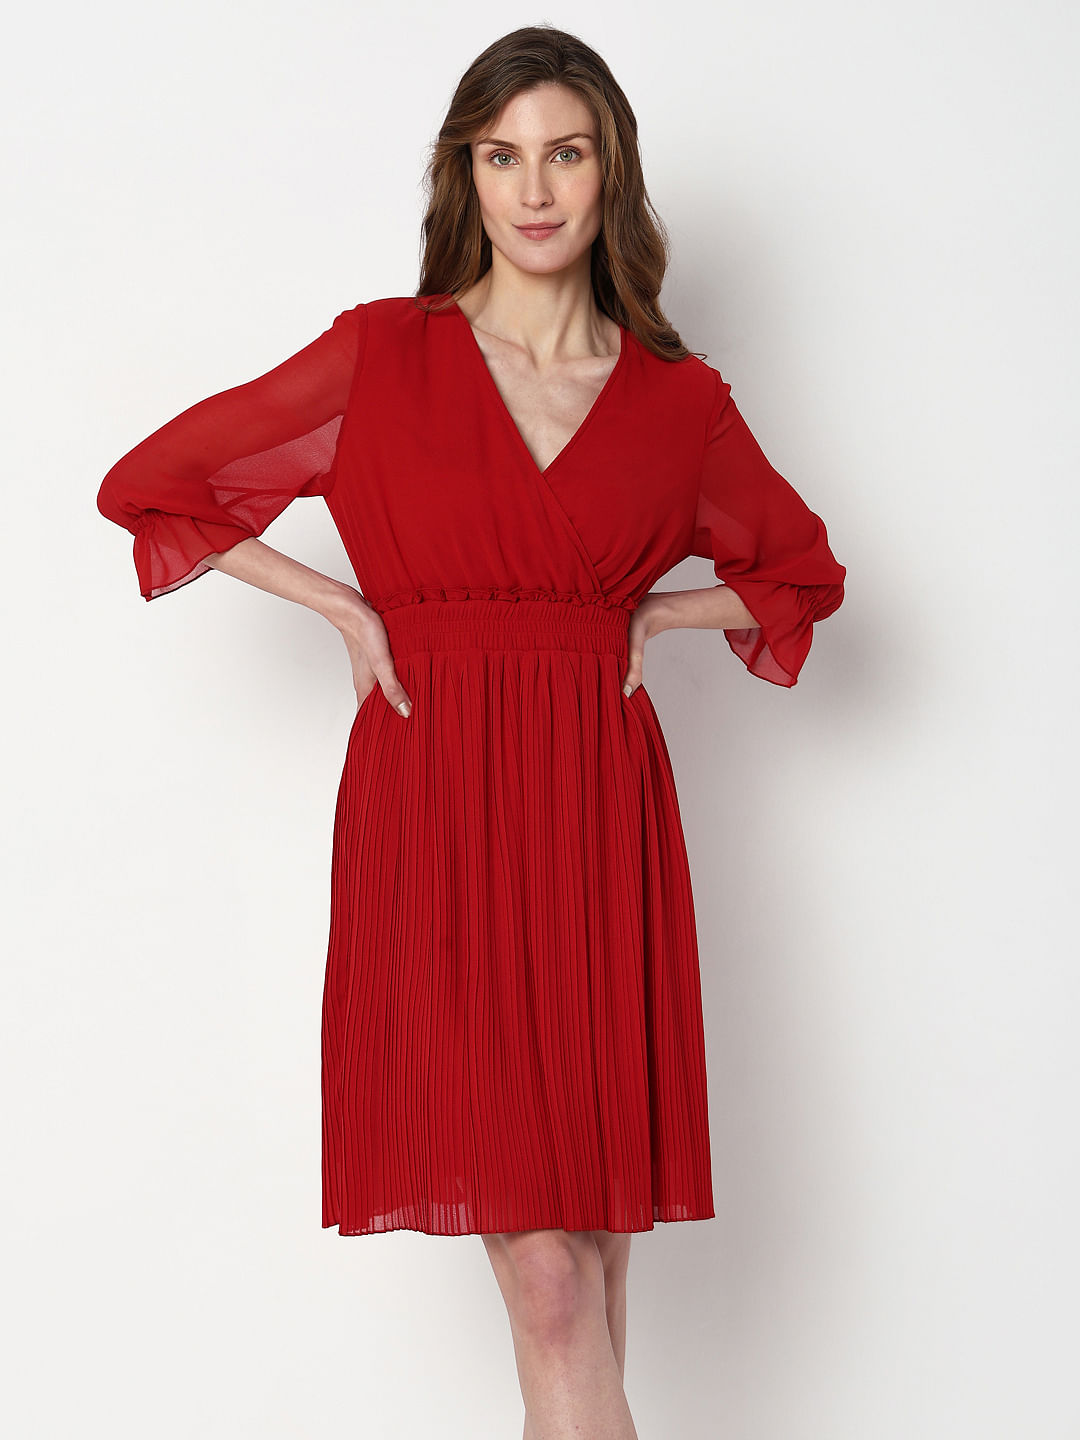 SASSAFRAS Women Fit and Flare Red Dress - Buy SASSAFRAS Women Fit and Flare  Red Dress Online at Best Prices in India | Flipkart.com